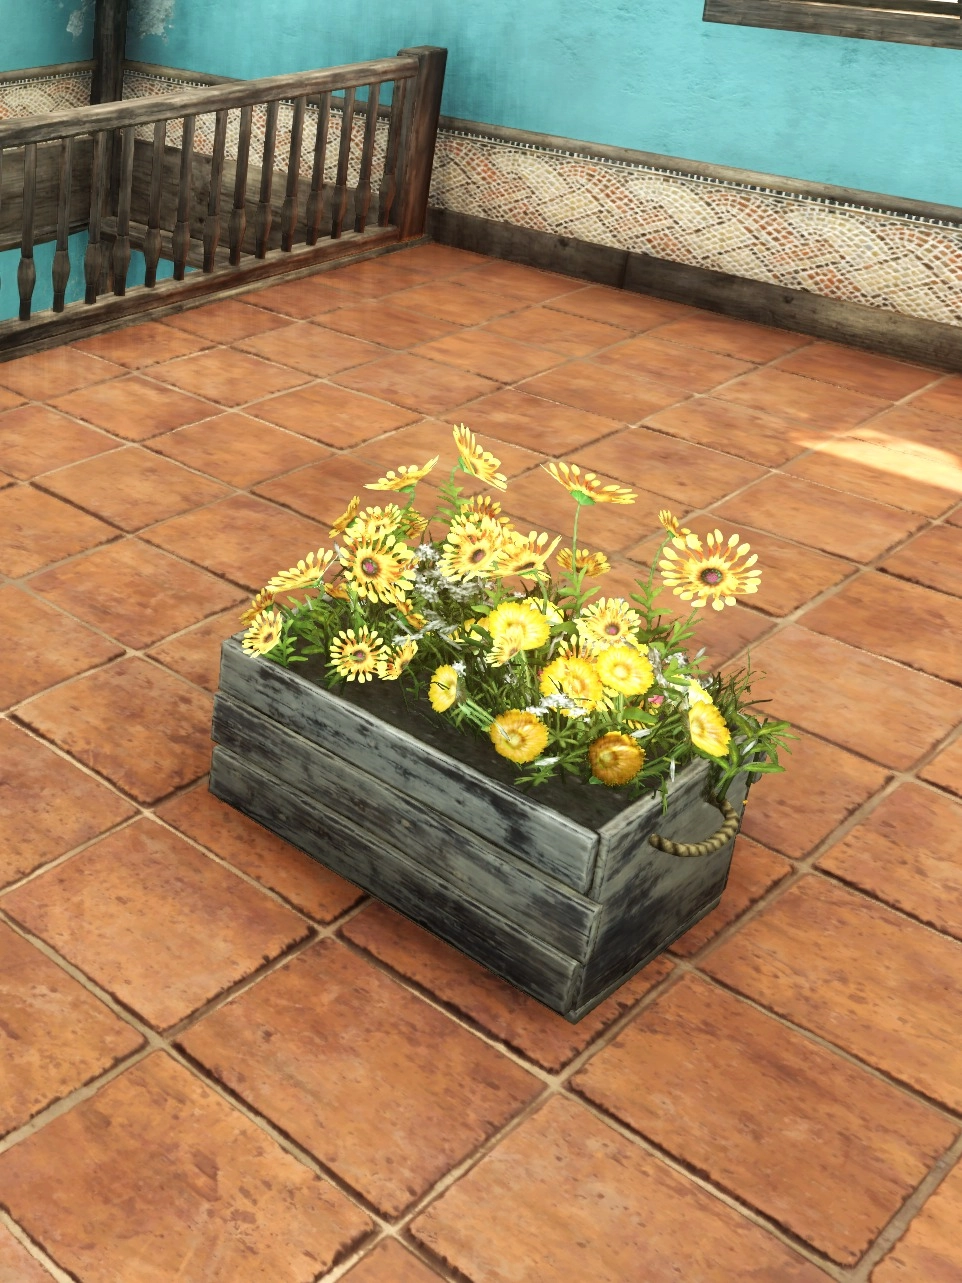 Crate of Flowers